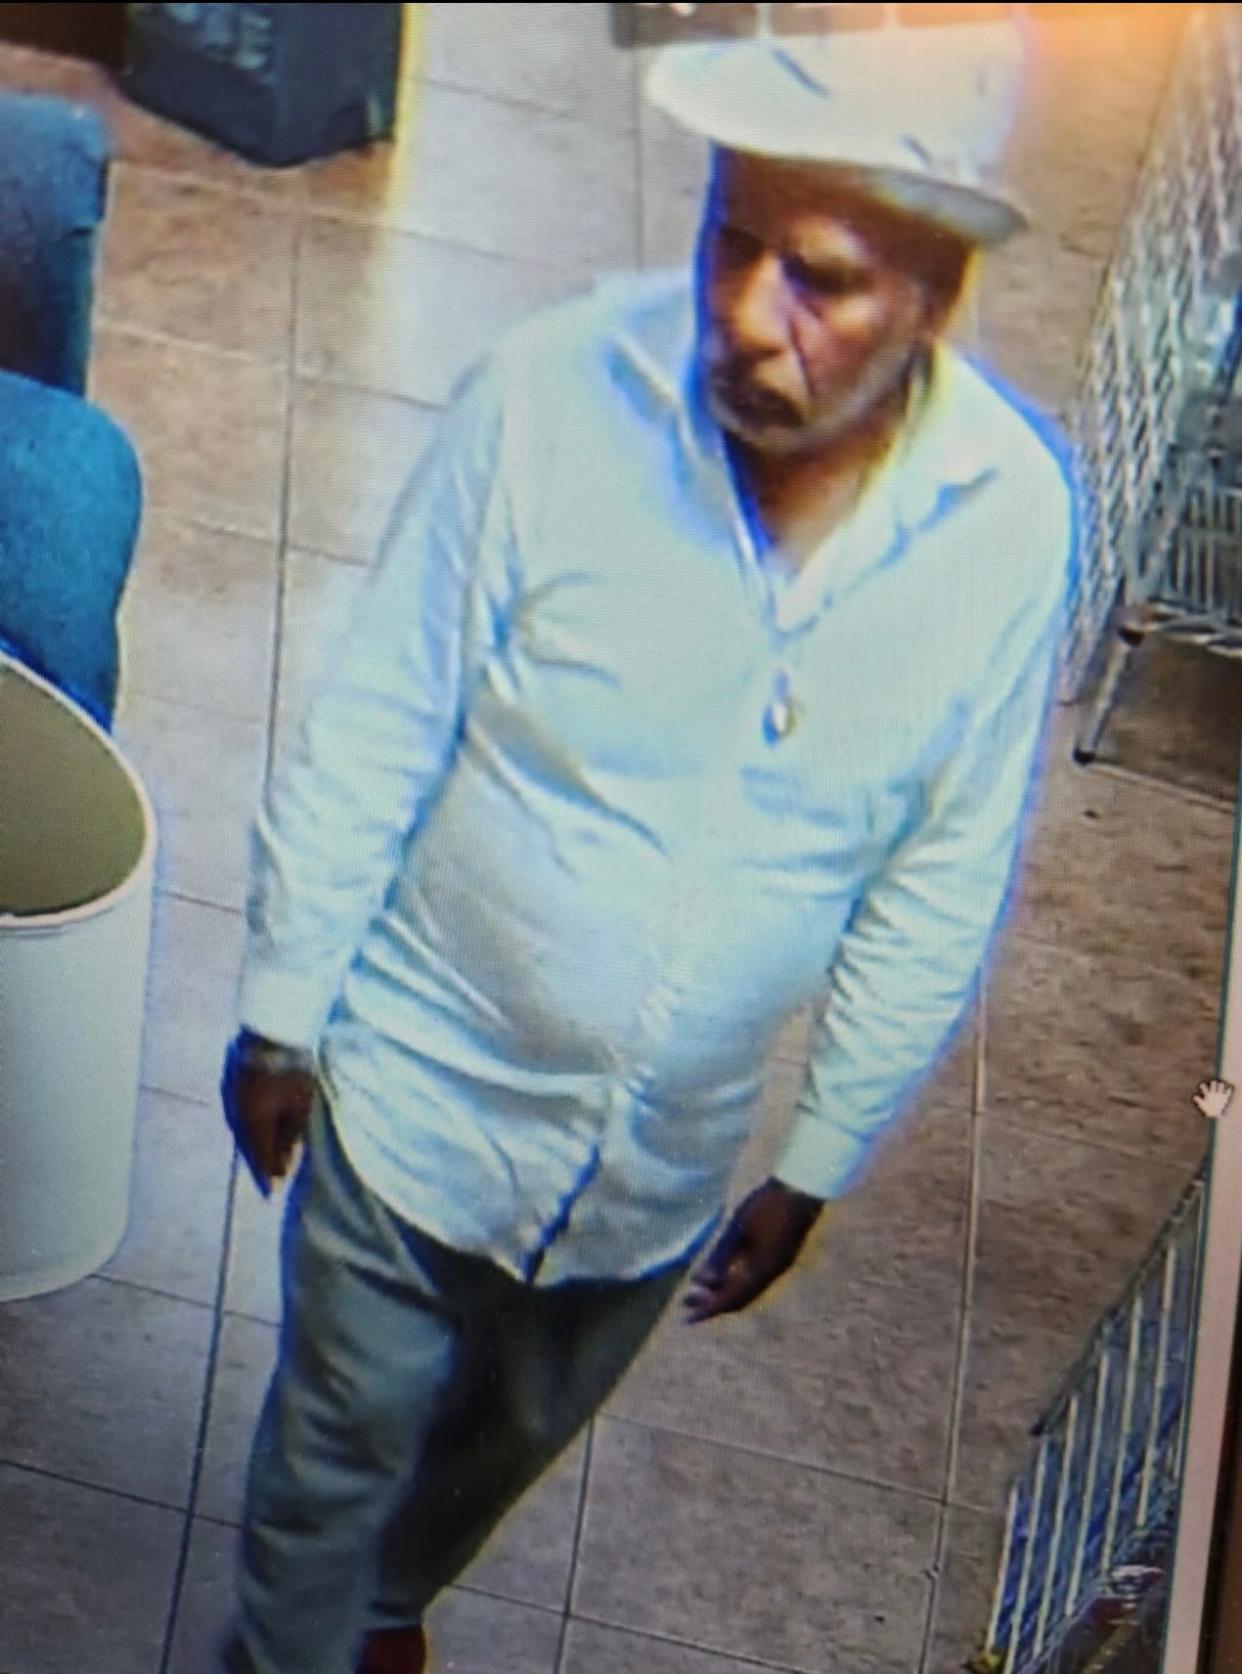 Fort Pierce police are looking for this man in connection with an Oct. 25, 2022, incident at a store in Sabal Palm Plaza